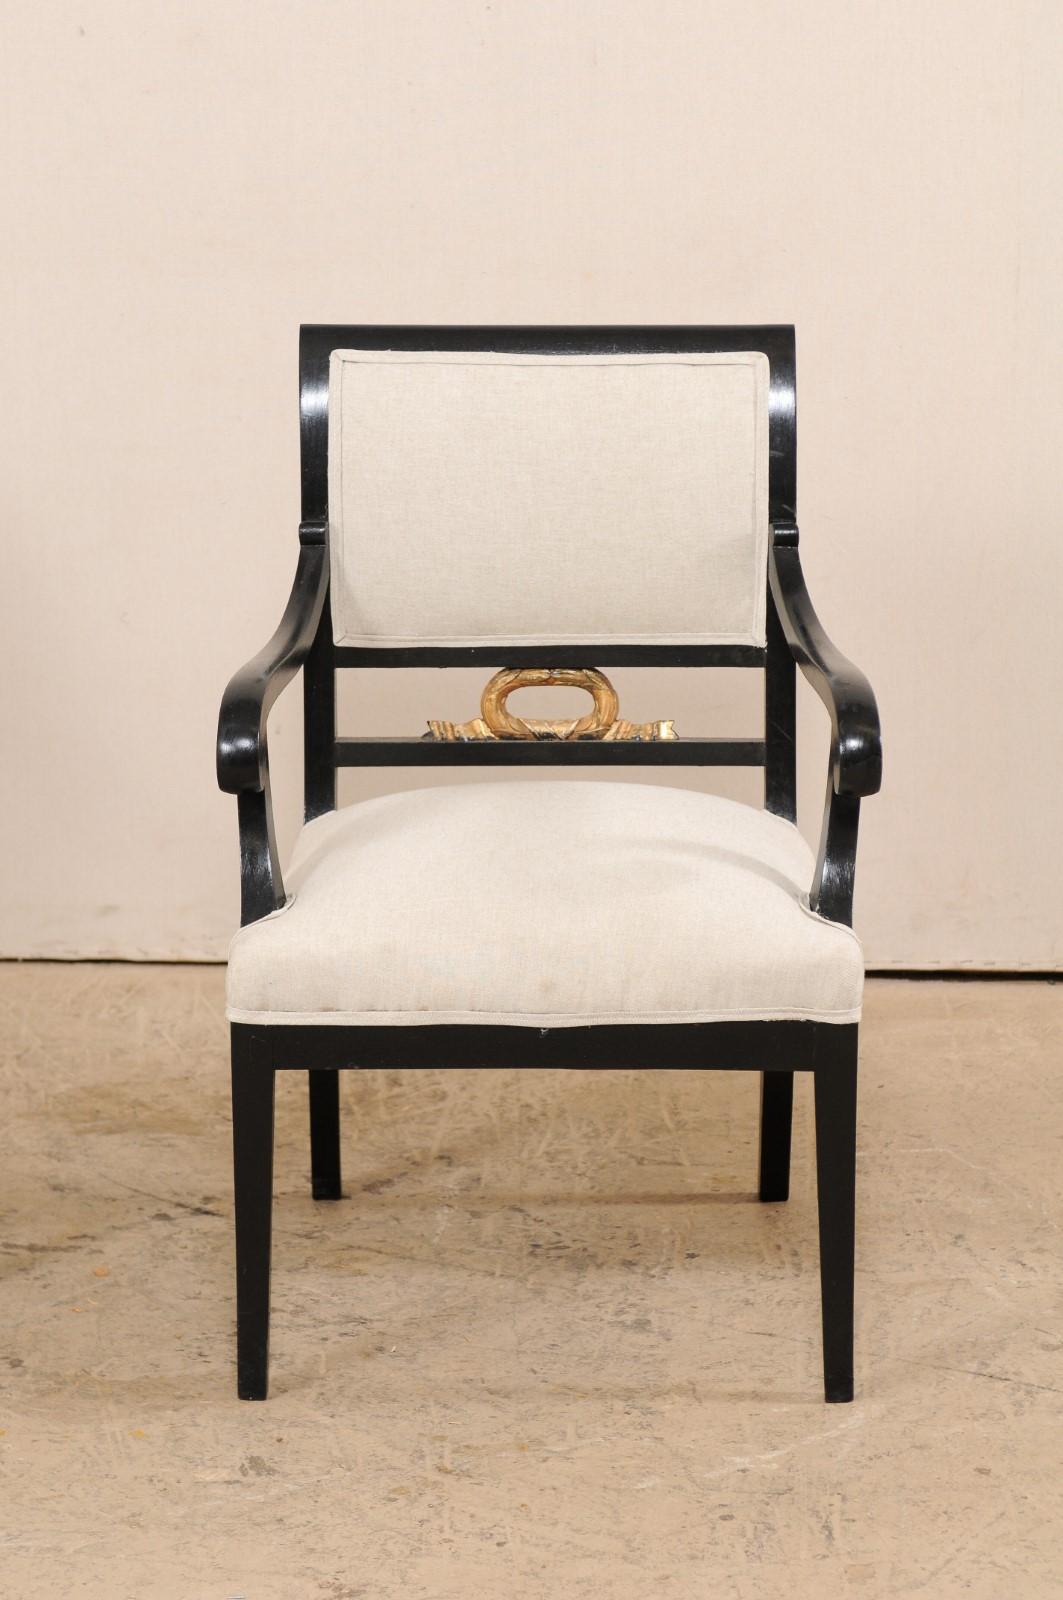 Pair of Swedish Empire Armchairs in Black w/Gold Accents from the Mid-19th C. In Good Condition For Sale In Atlanta, GA